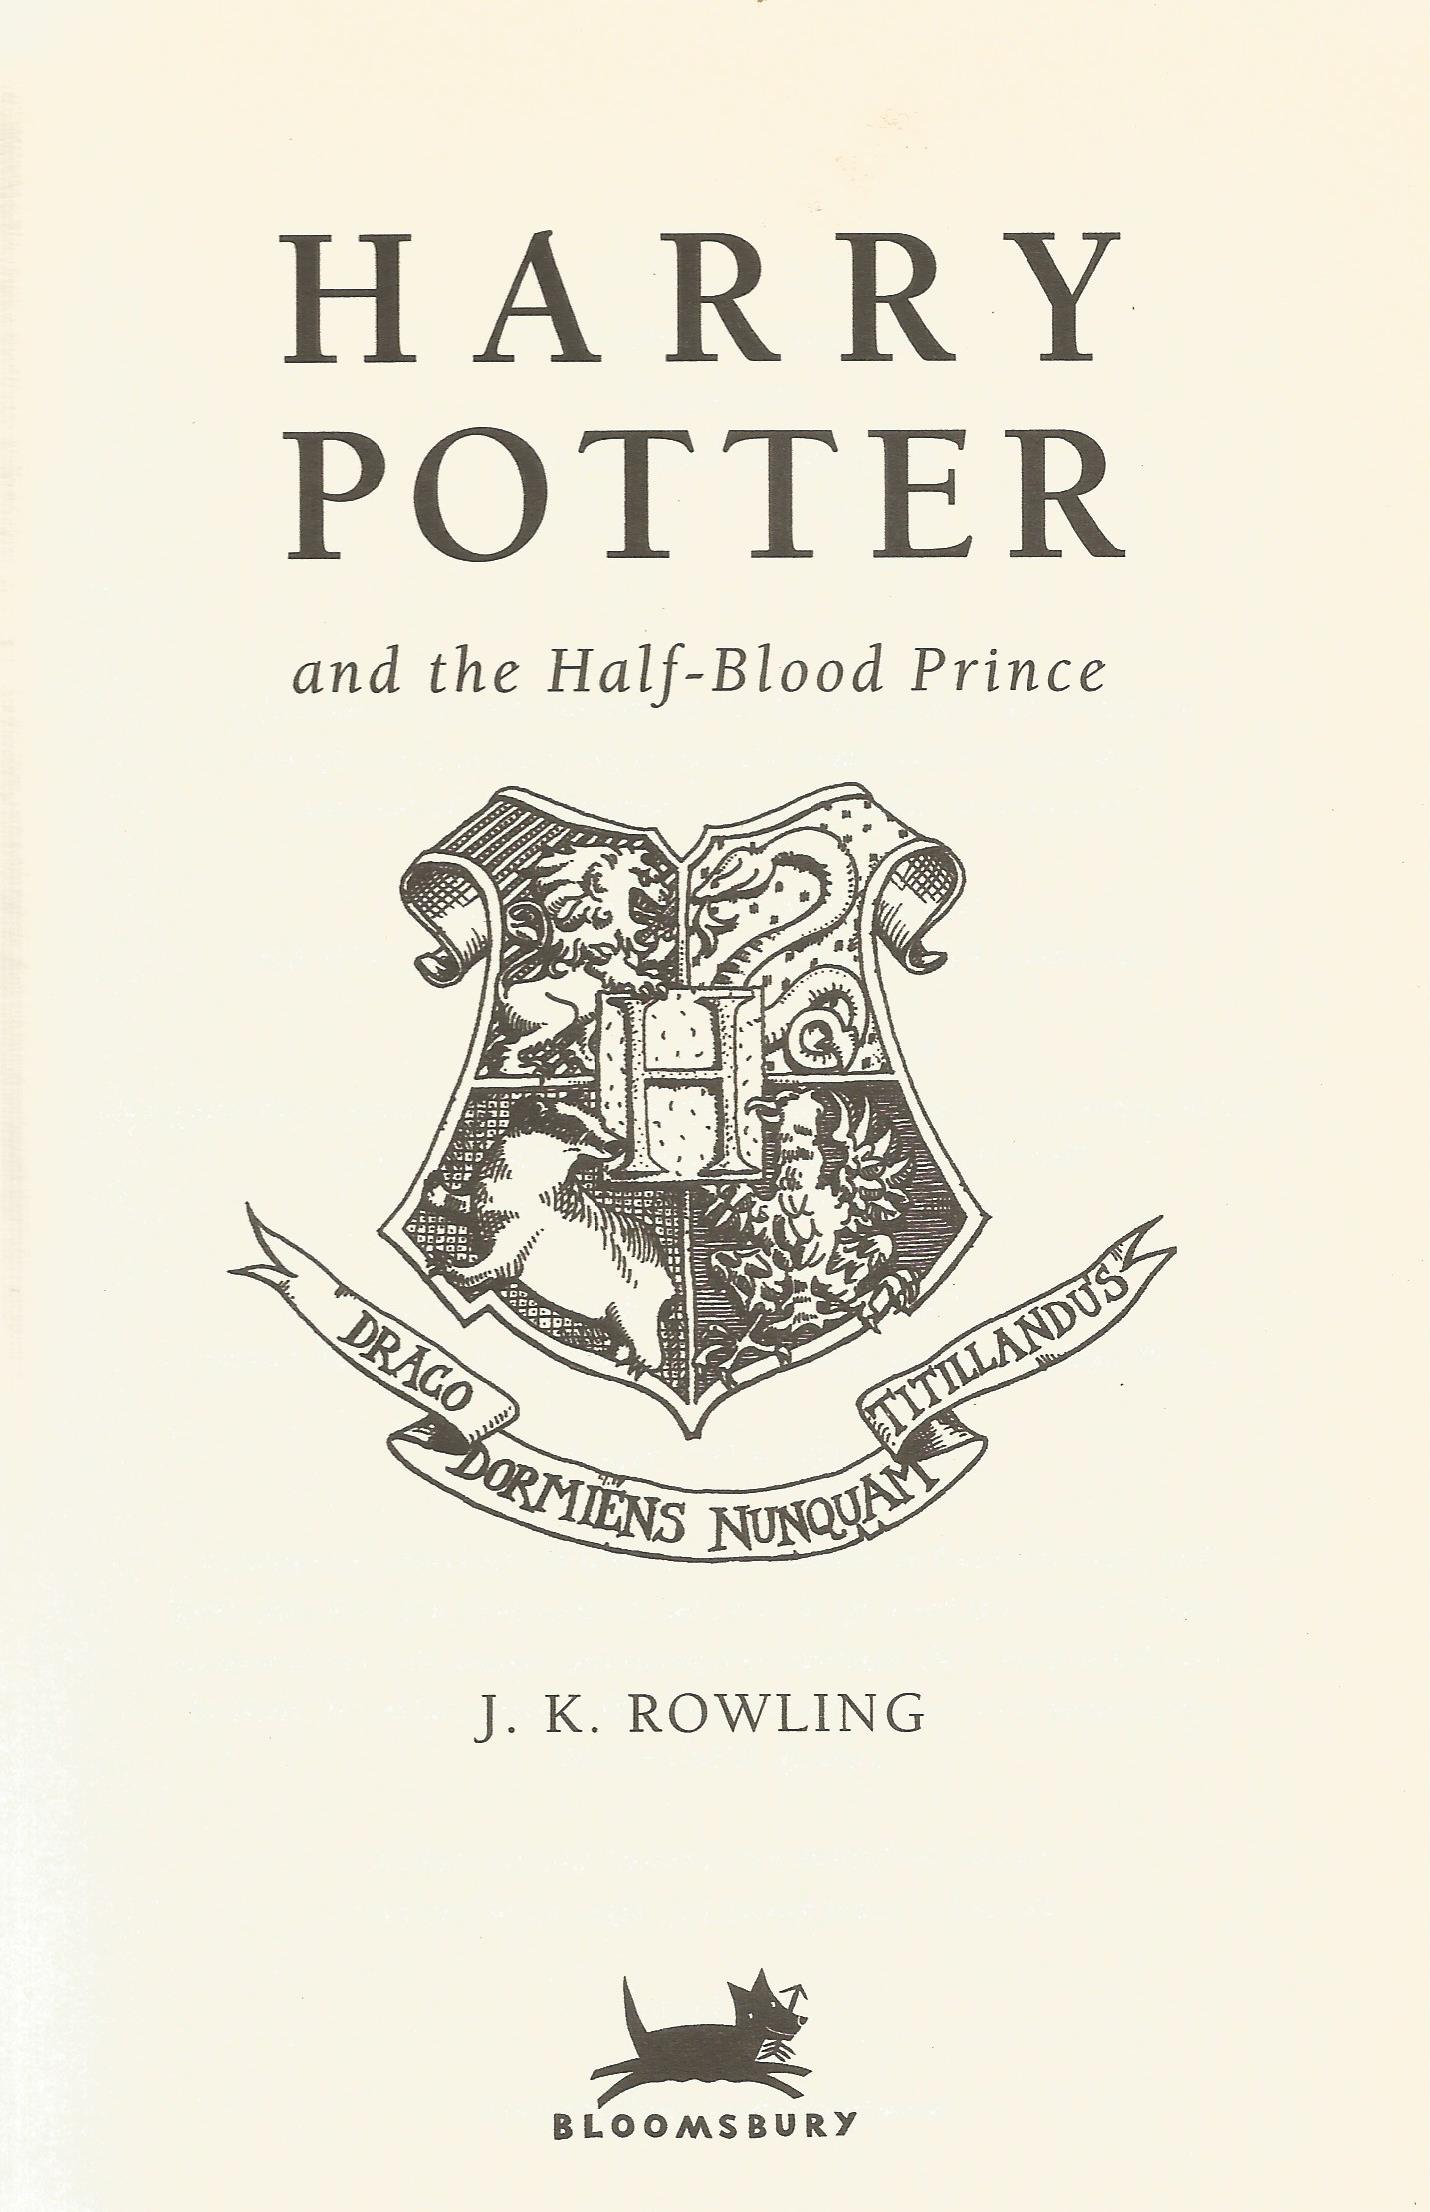 Harry Potter and the Half Blood Prince by J K Rowling Hardback Book 2005 First Edition published - Image 2 of 3